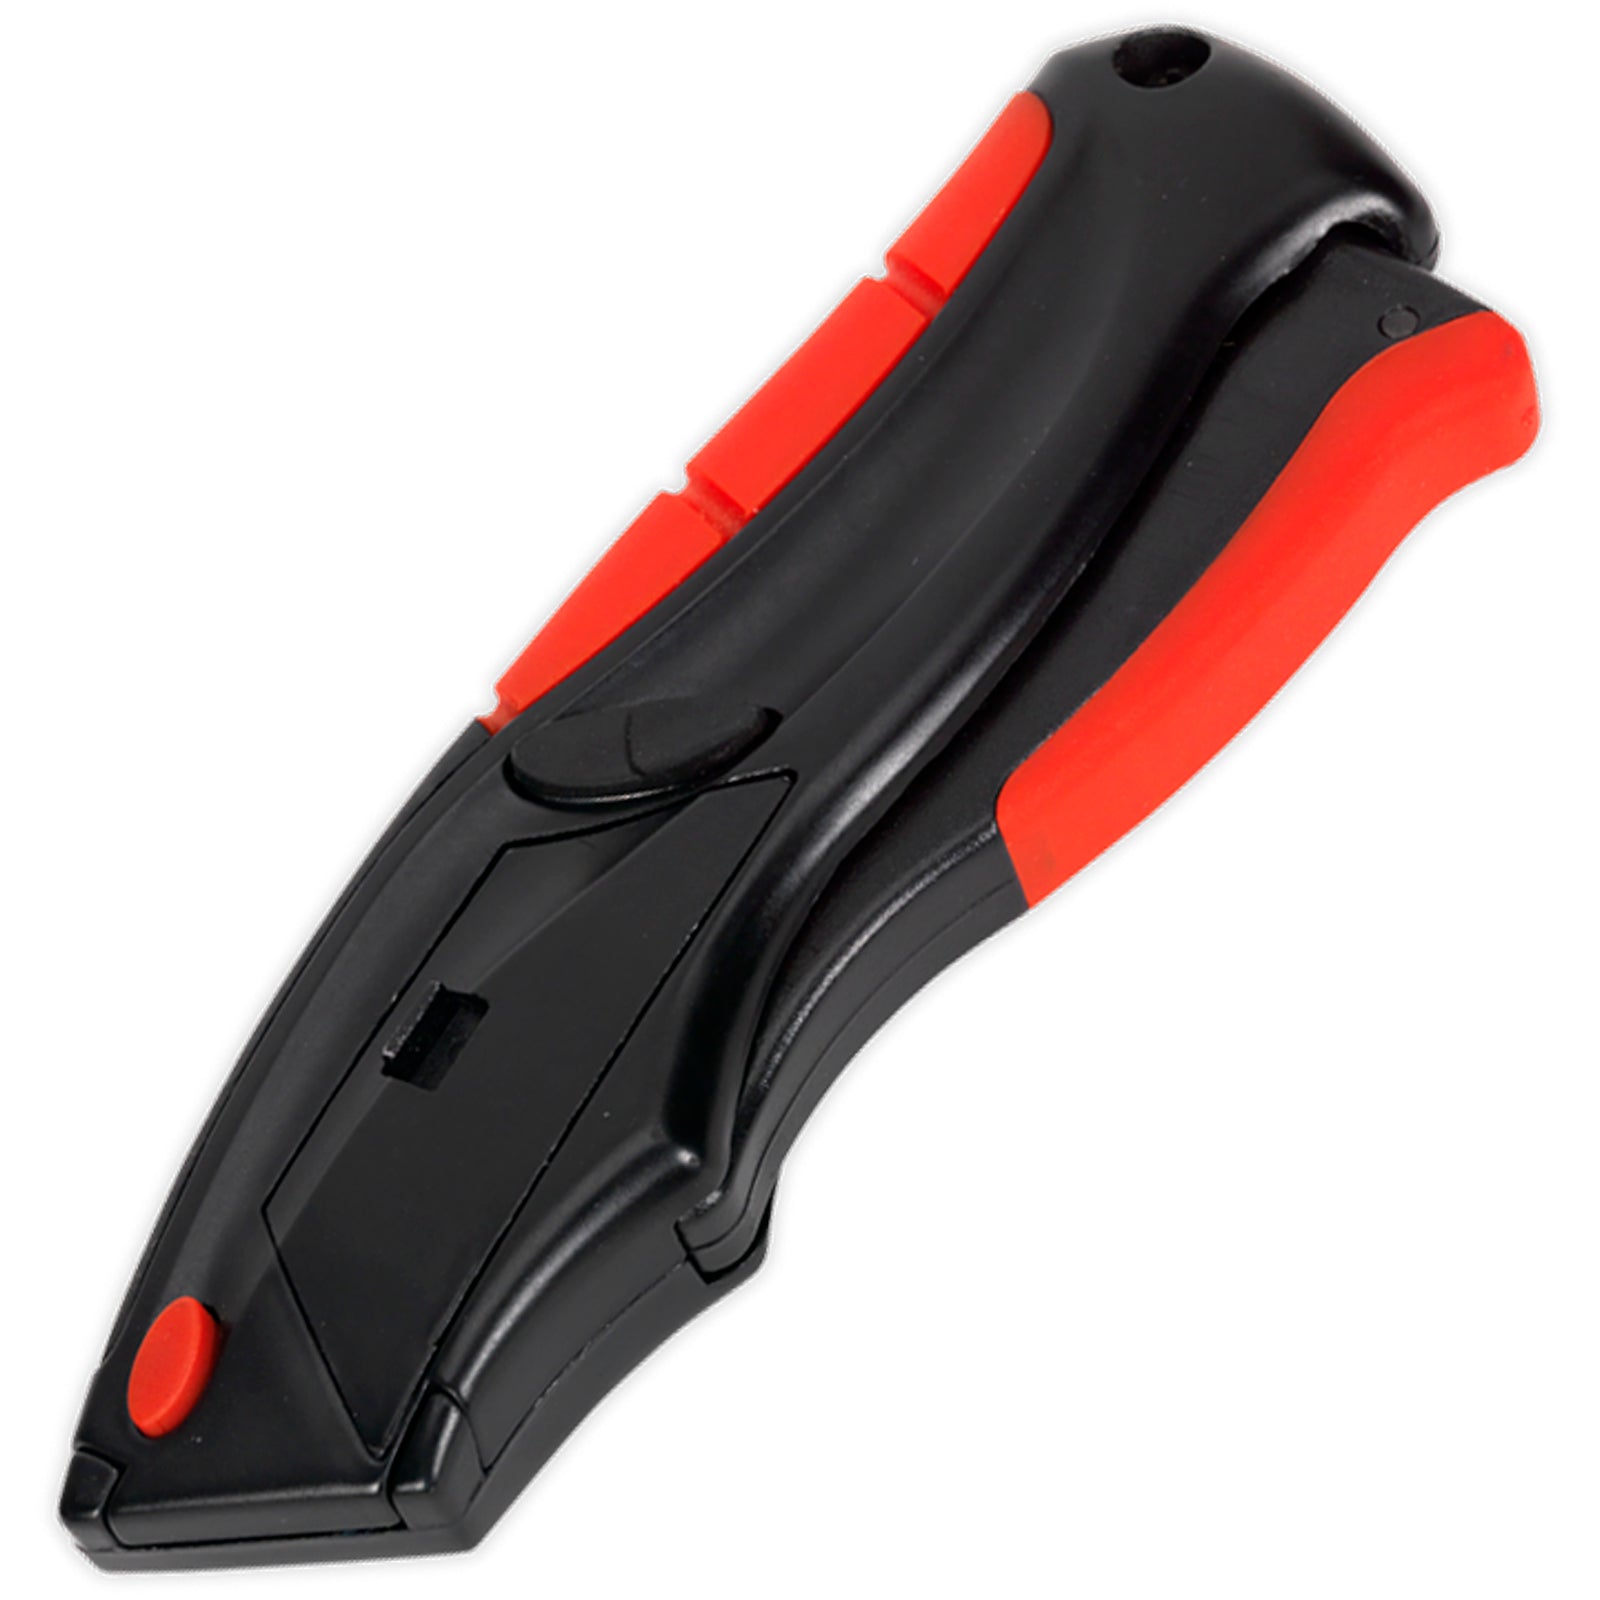 Sealey Premier Auto Loading Squeeze Action Utility Knife